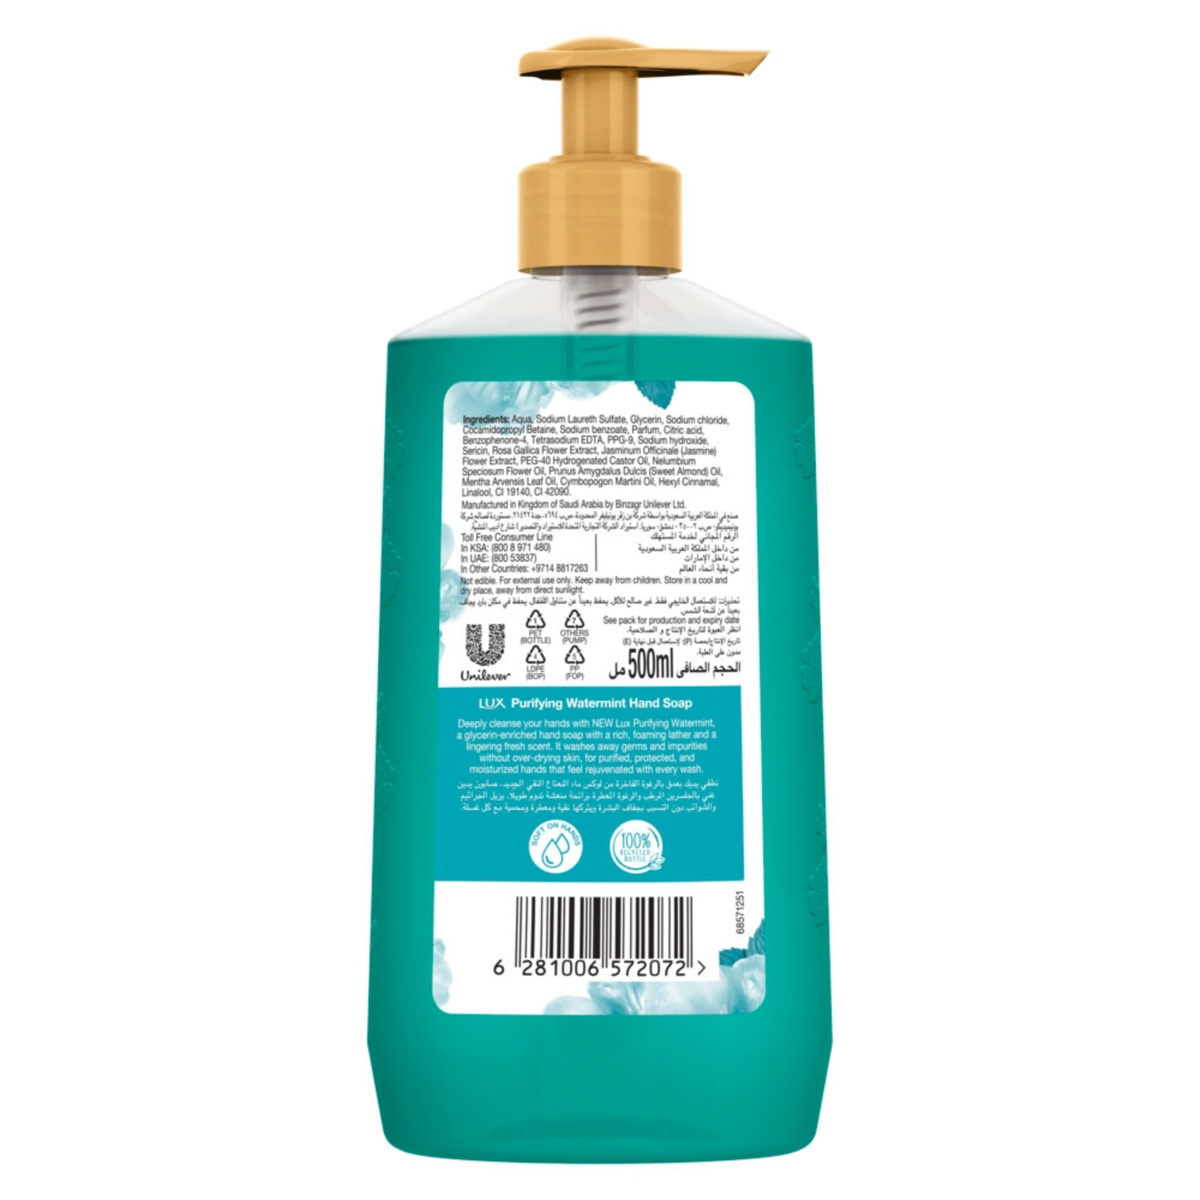 Lux Purifying Watermint Perfumed Hand Soap 500 ml